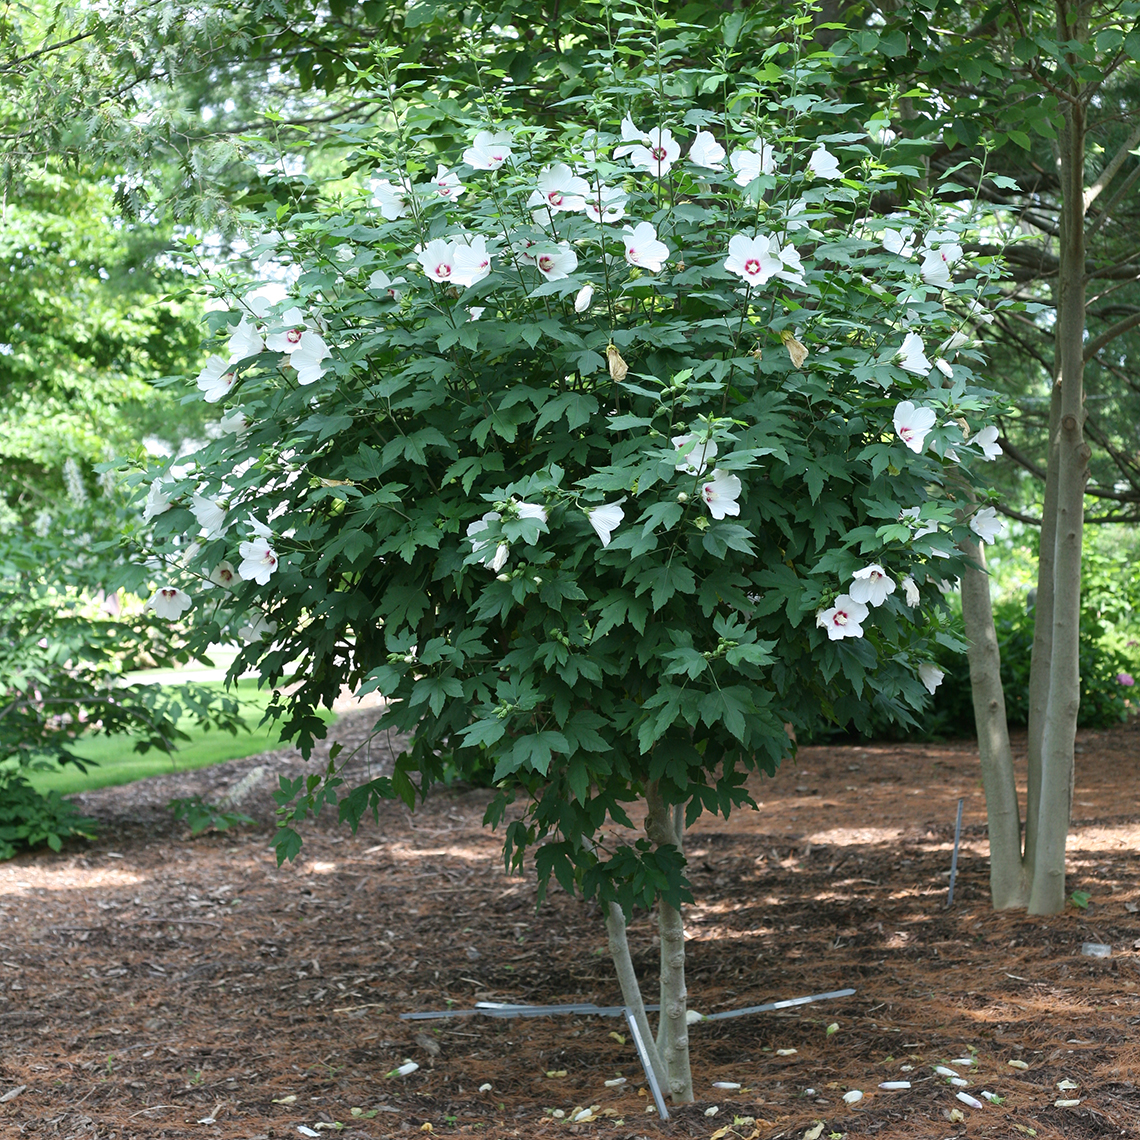 A specimen of Lohengrin hibiscus in a landscape that has been trained to take on a tree like form